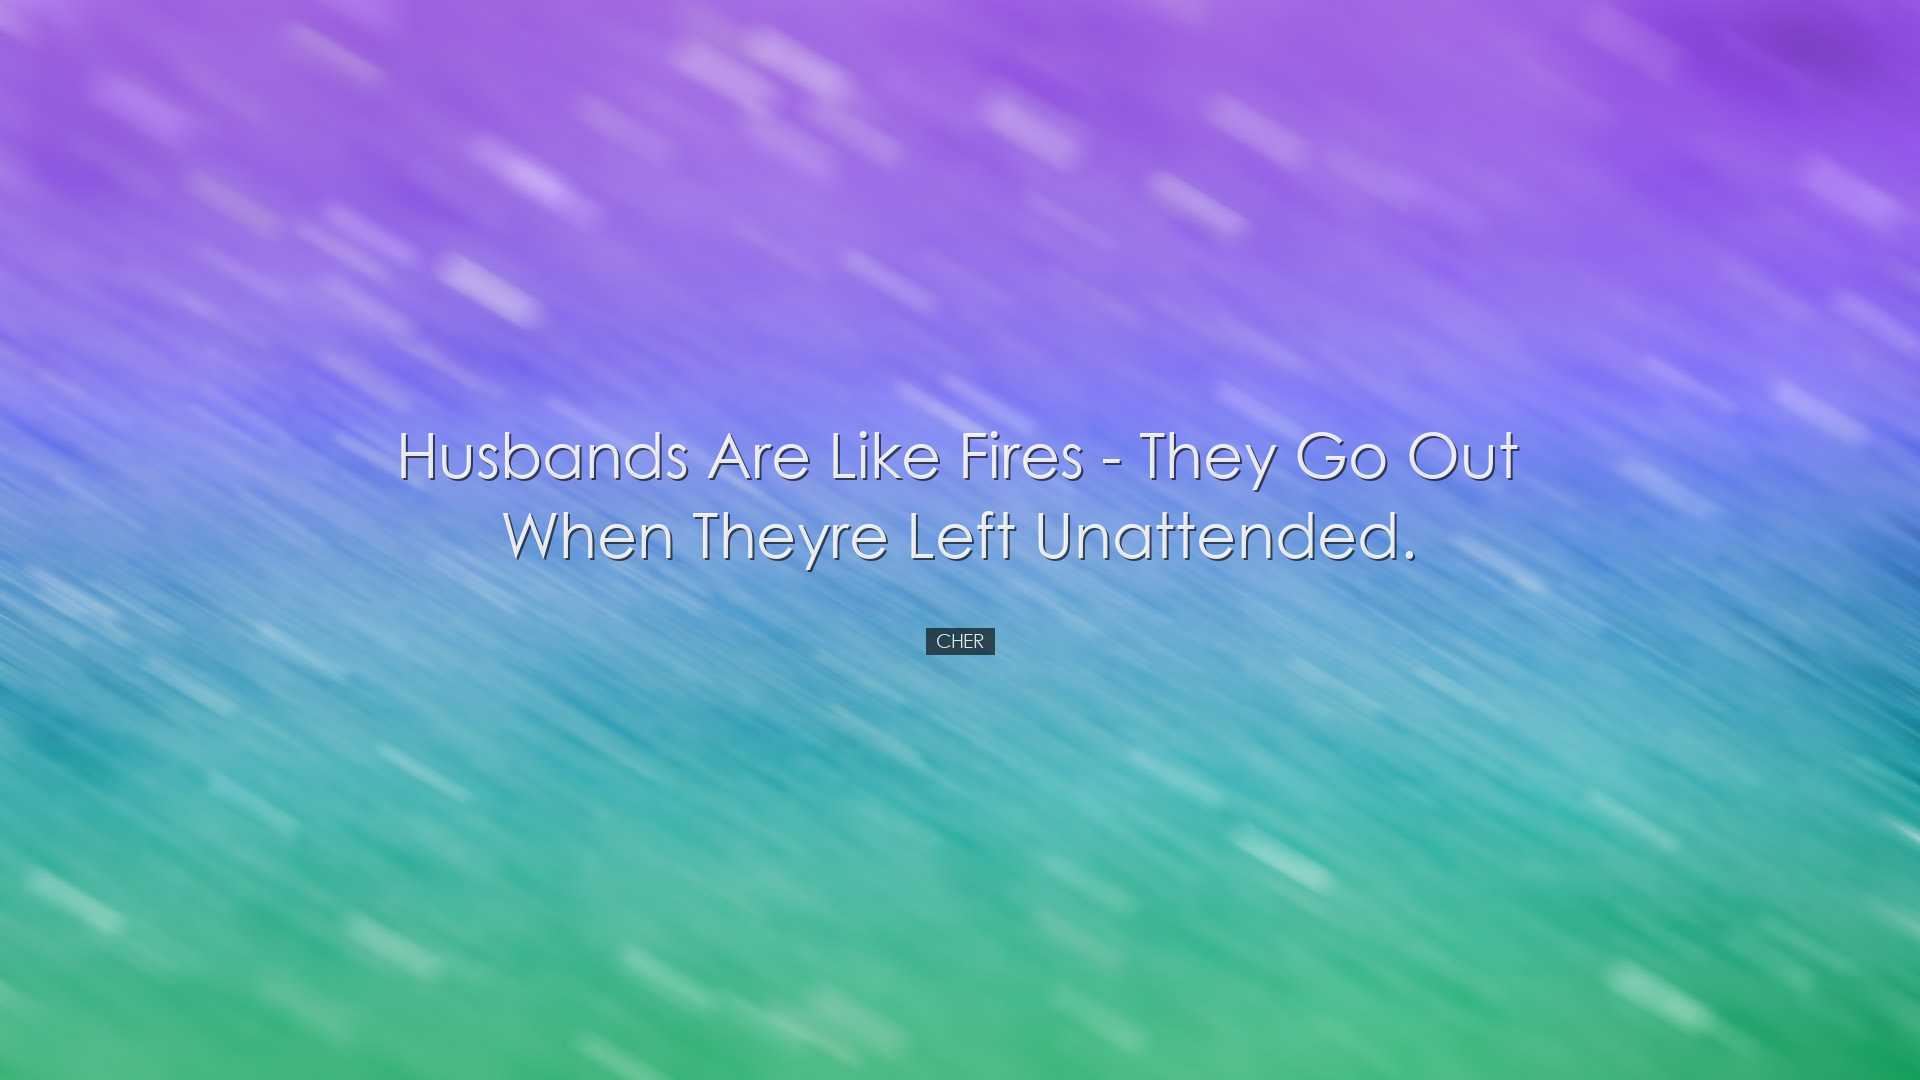 Husbands are like fires - they go out when theyre left unattended.